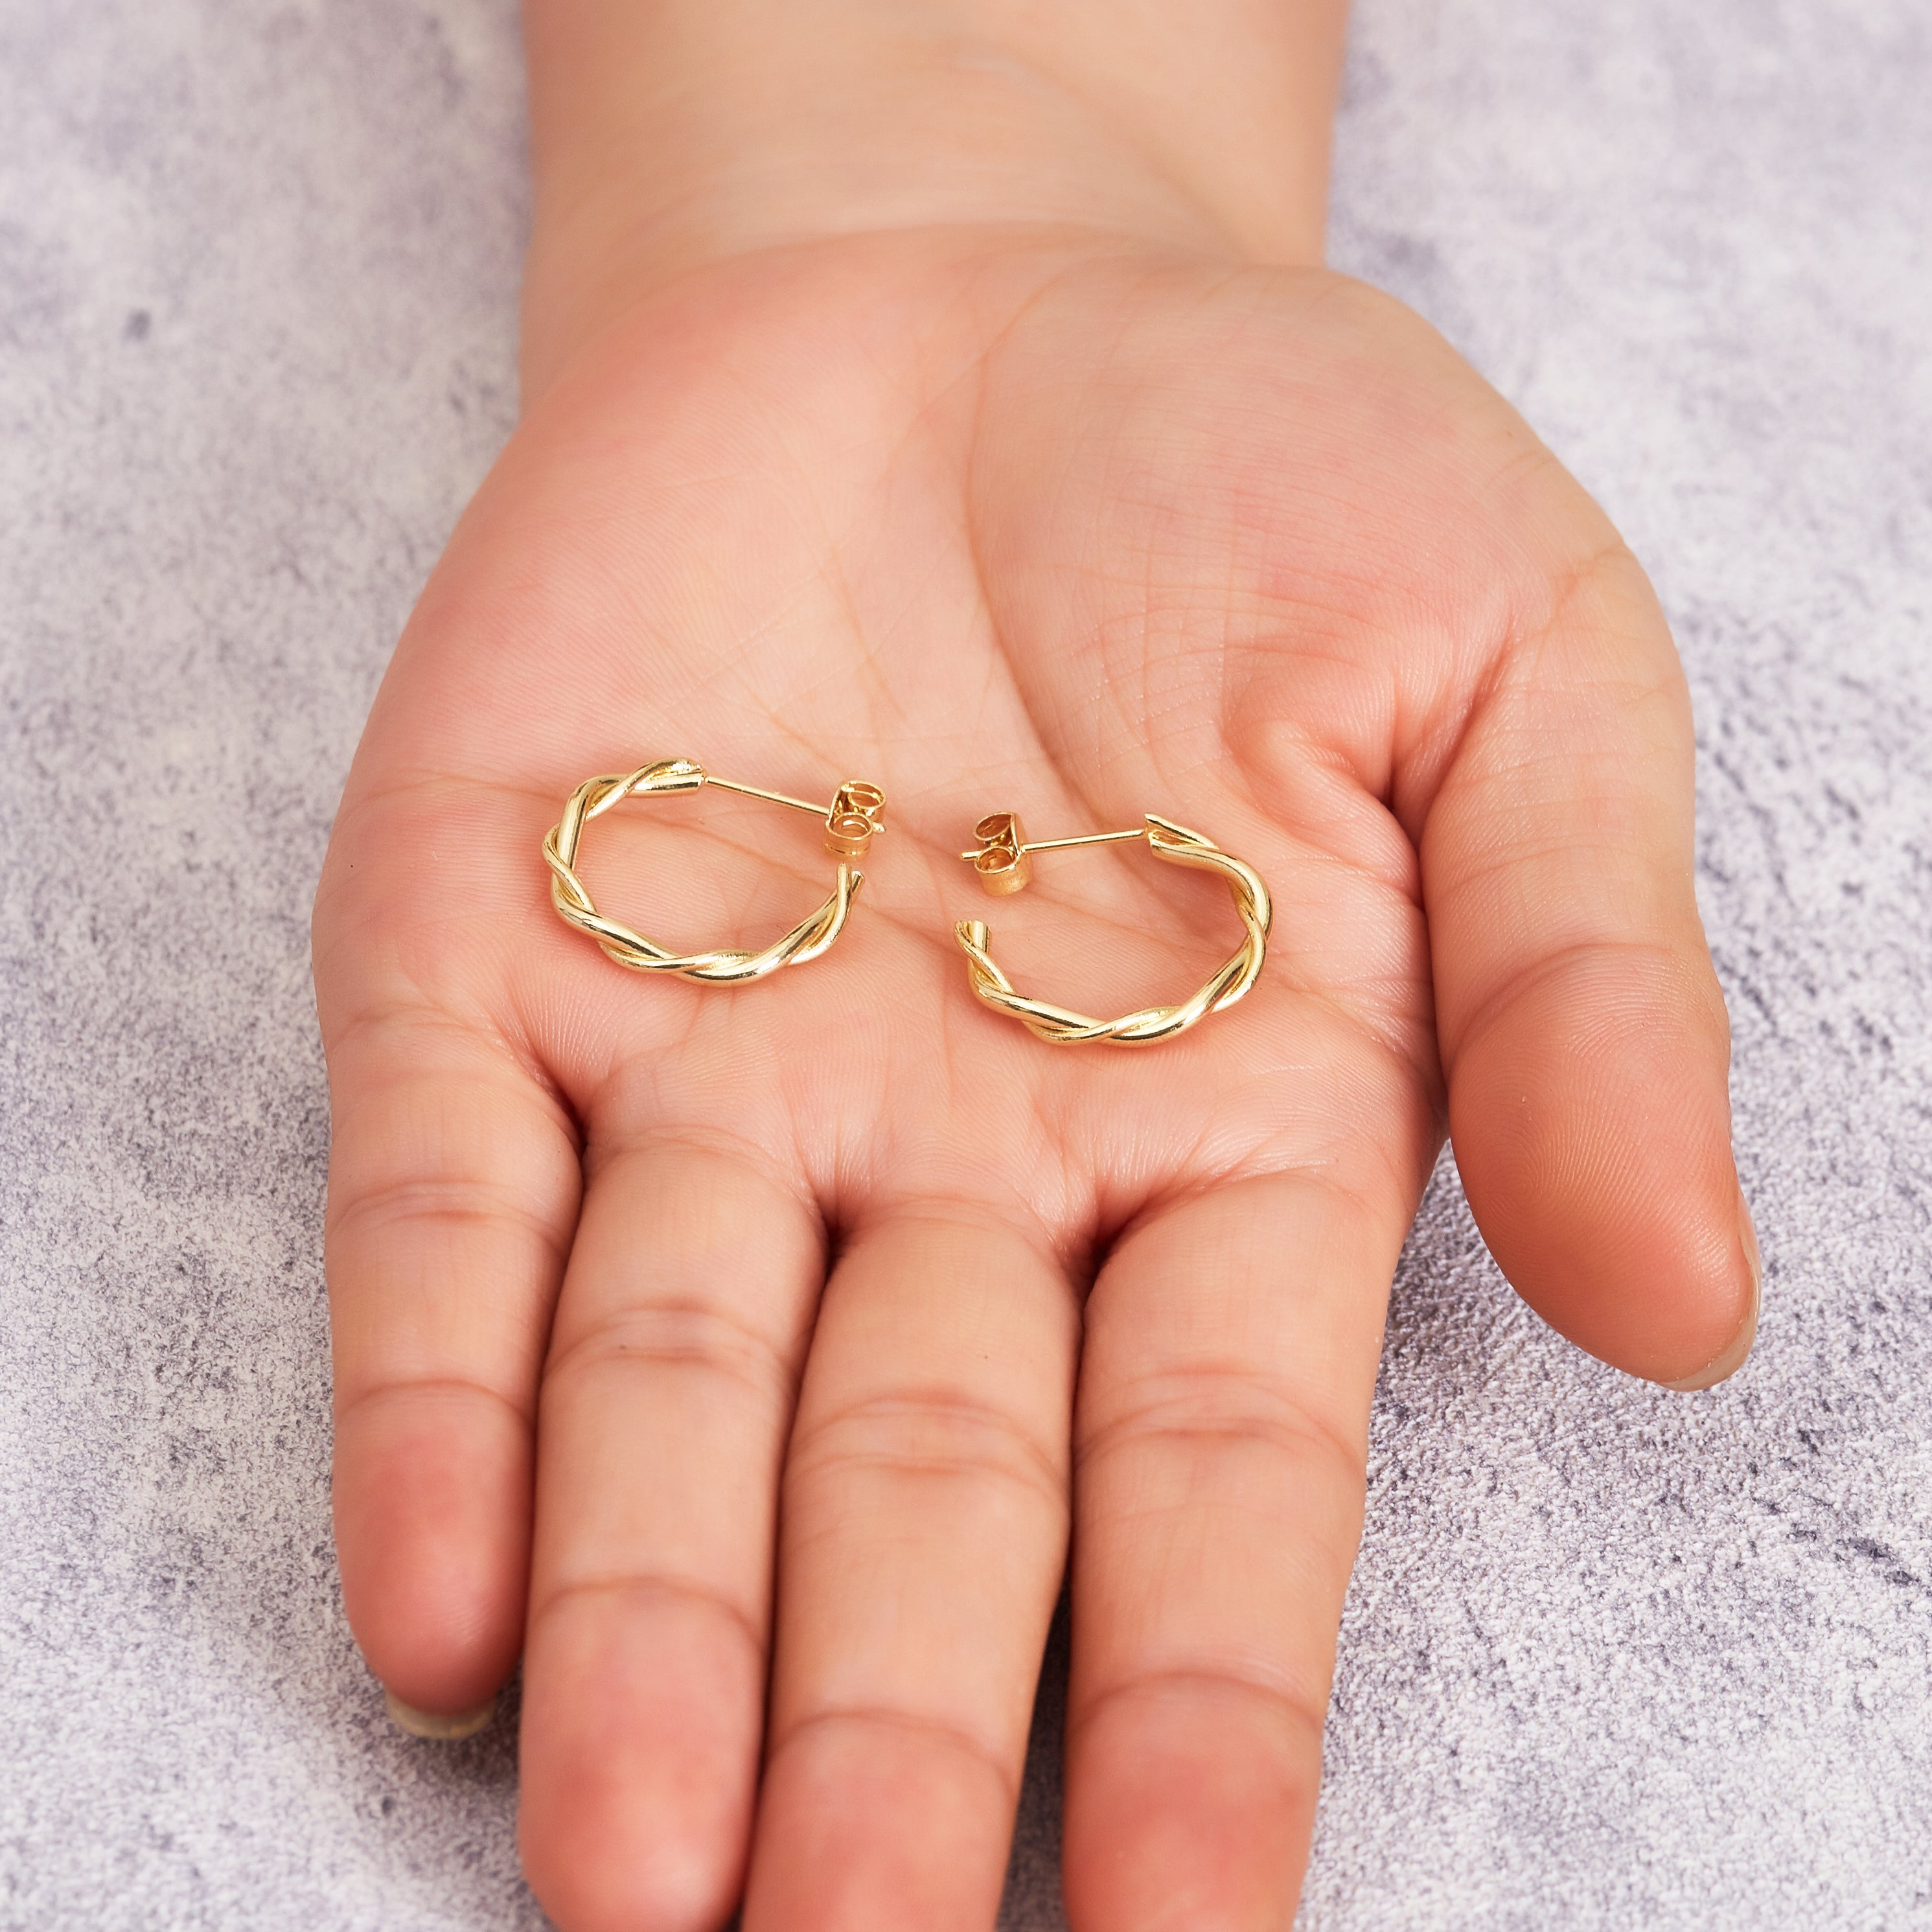 Gold Plated 20mm Twisted Hoop Earrings